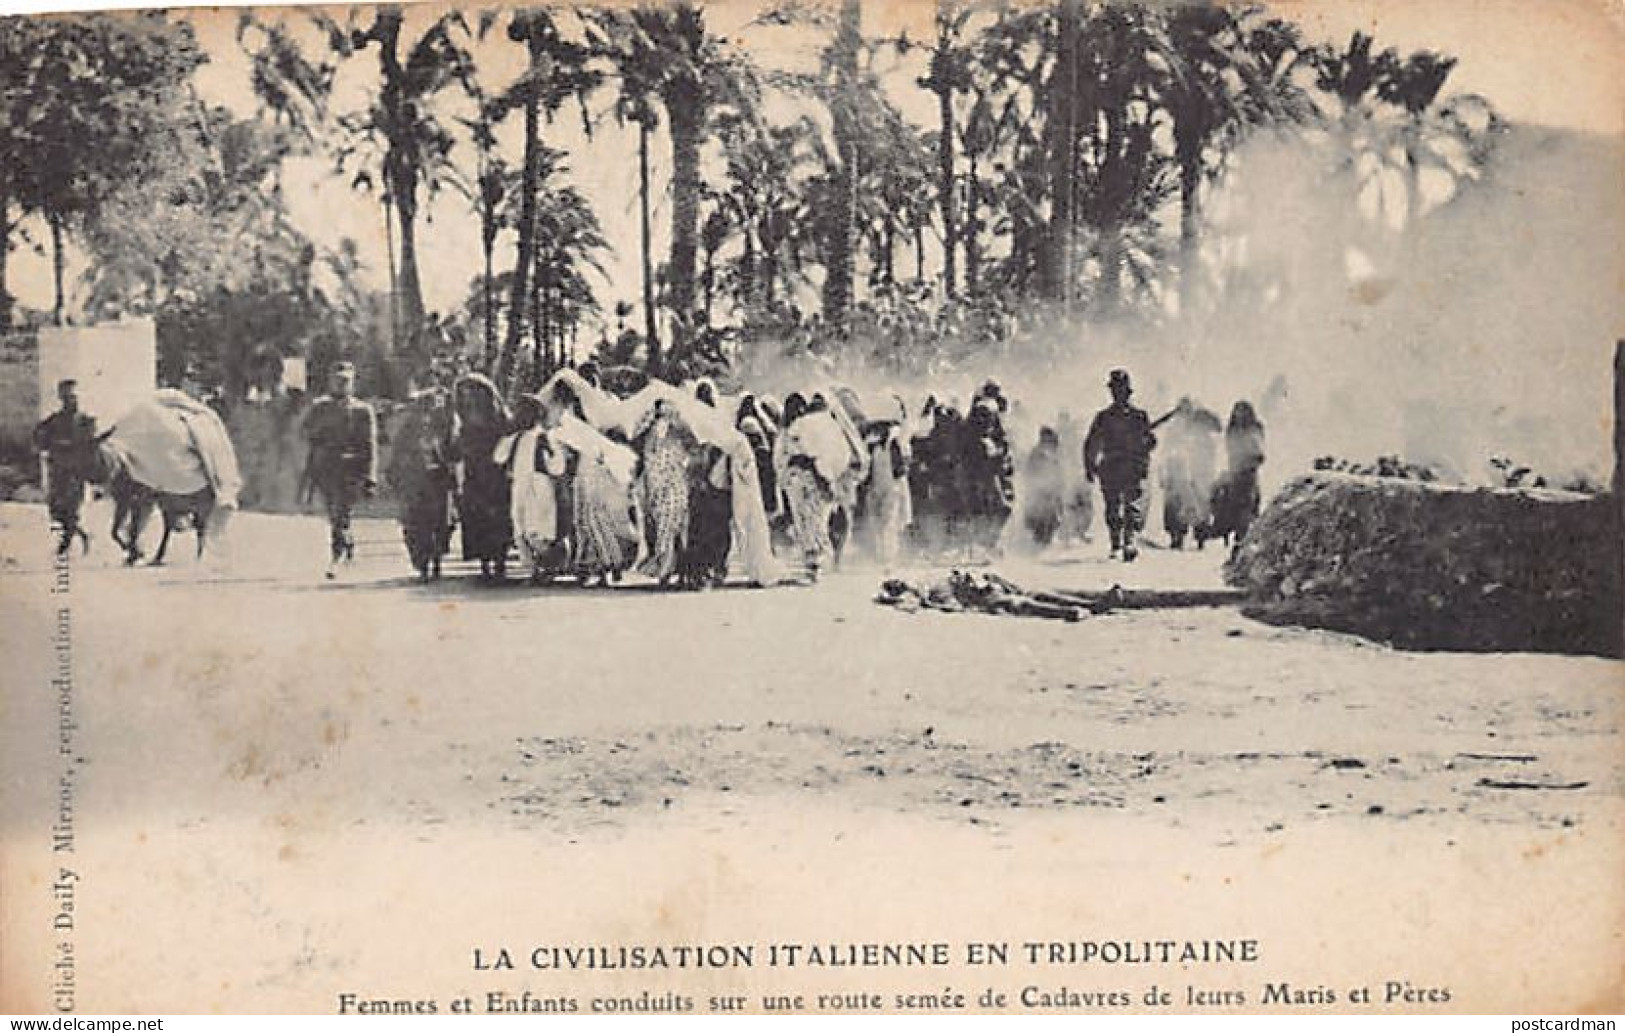 Libya - Italian Civilization In Tripolitania - Women And Children Led On A Road Strewn With The Corpses Of Their Husband - Libia